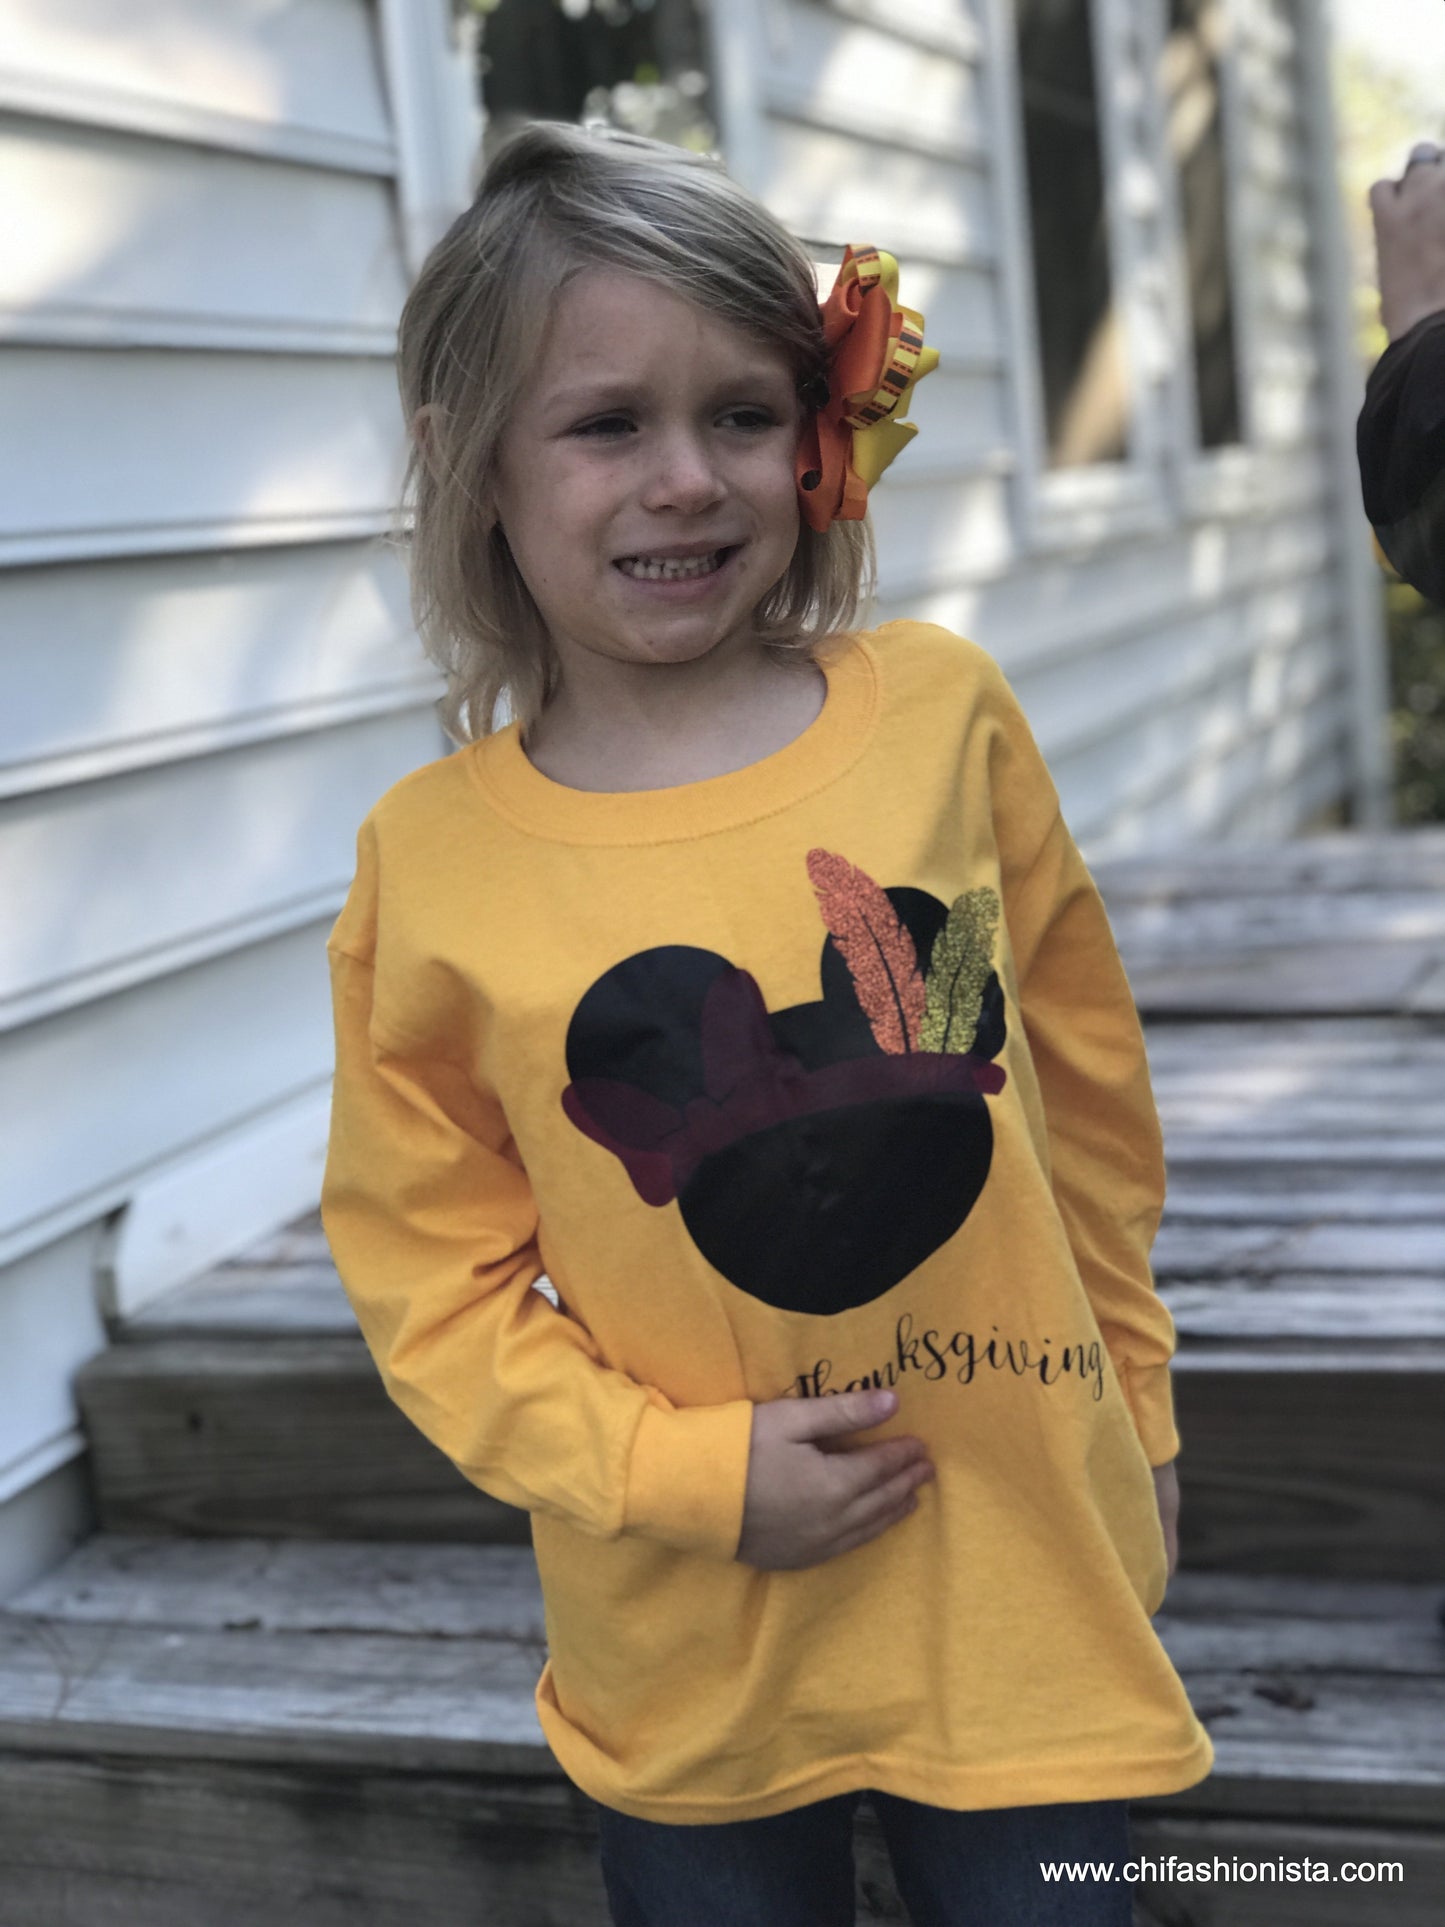 Native American Mouse Thanksgiving Tee